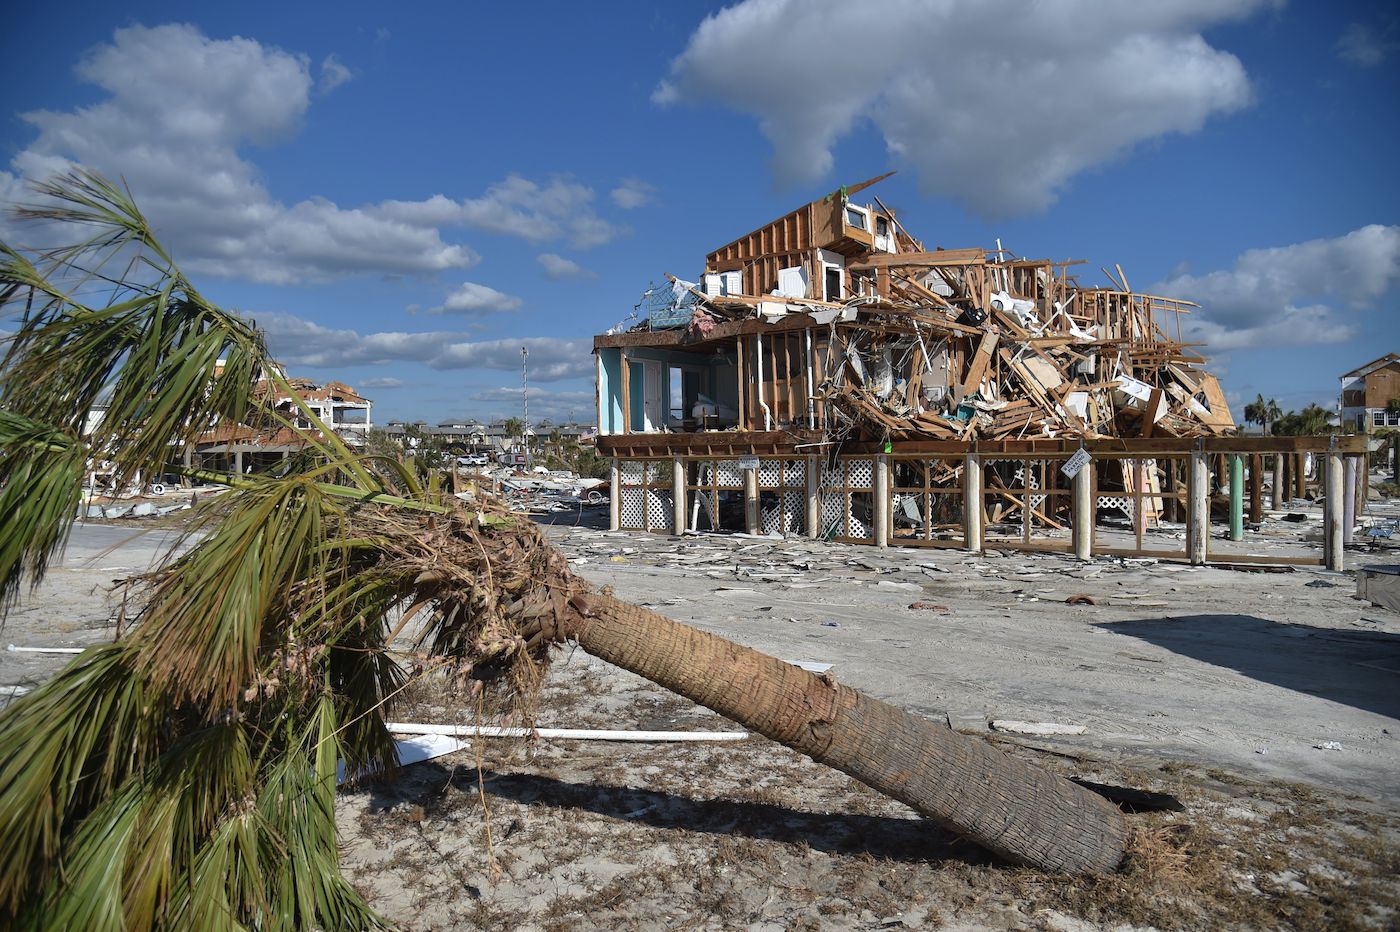 View of the damaged caused by Hurricane Michael in Mexico Beach, Florida, on October 13, 2018.